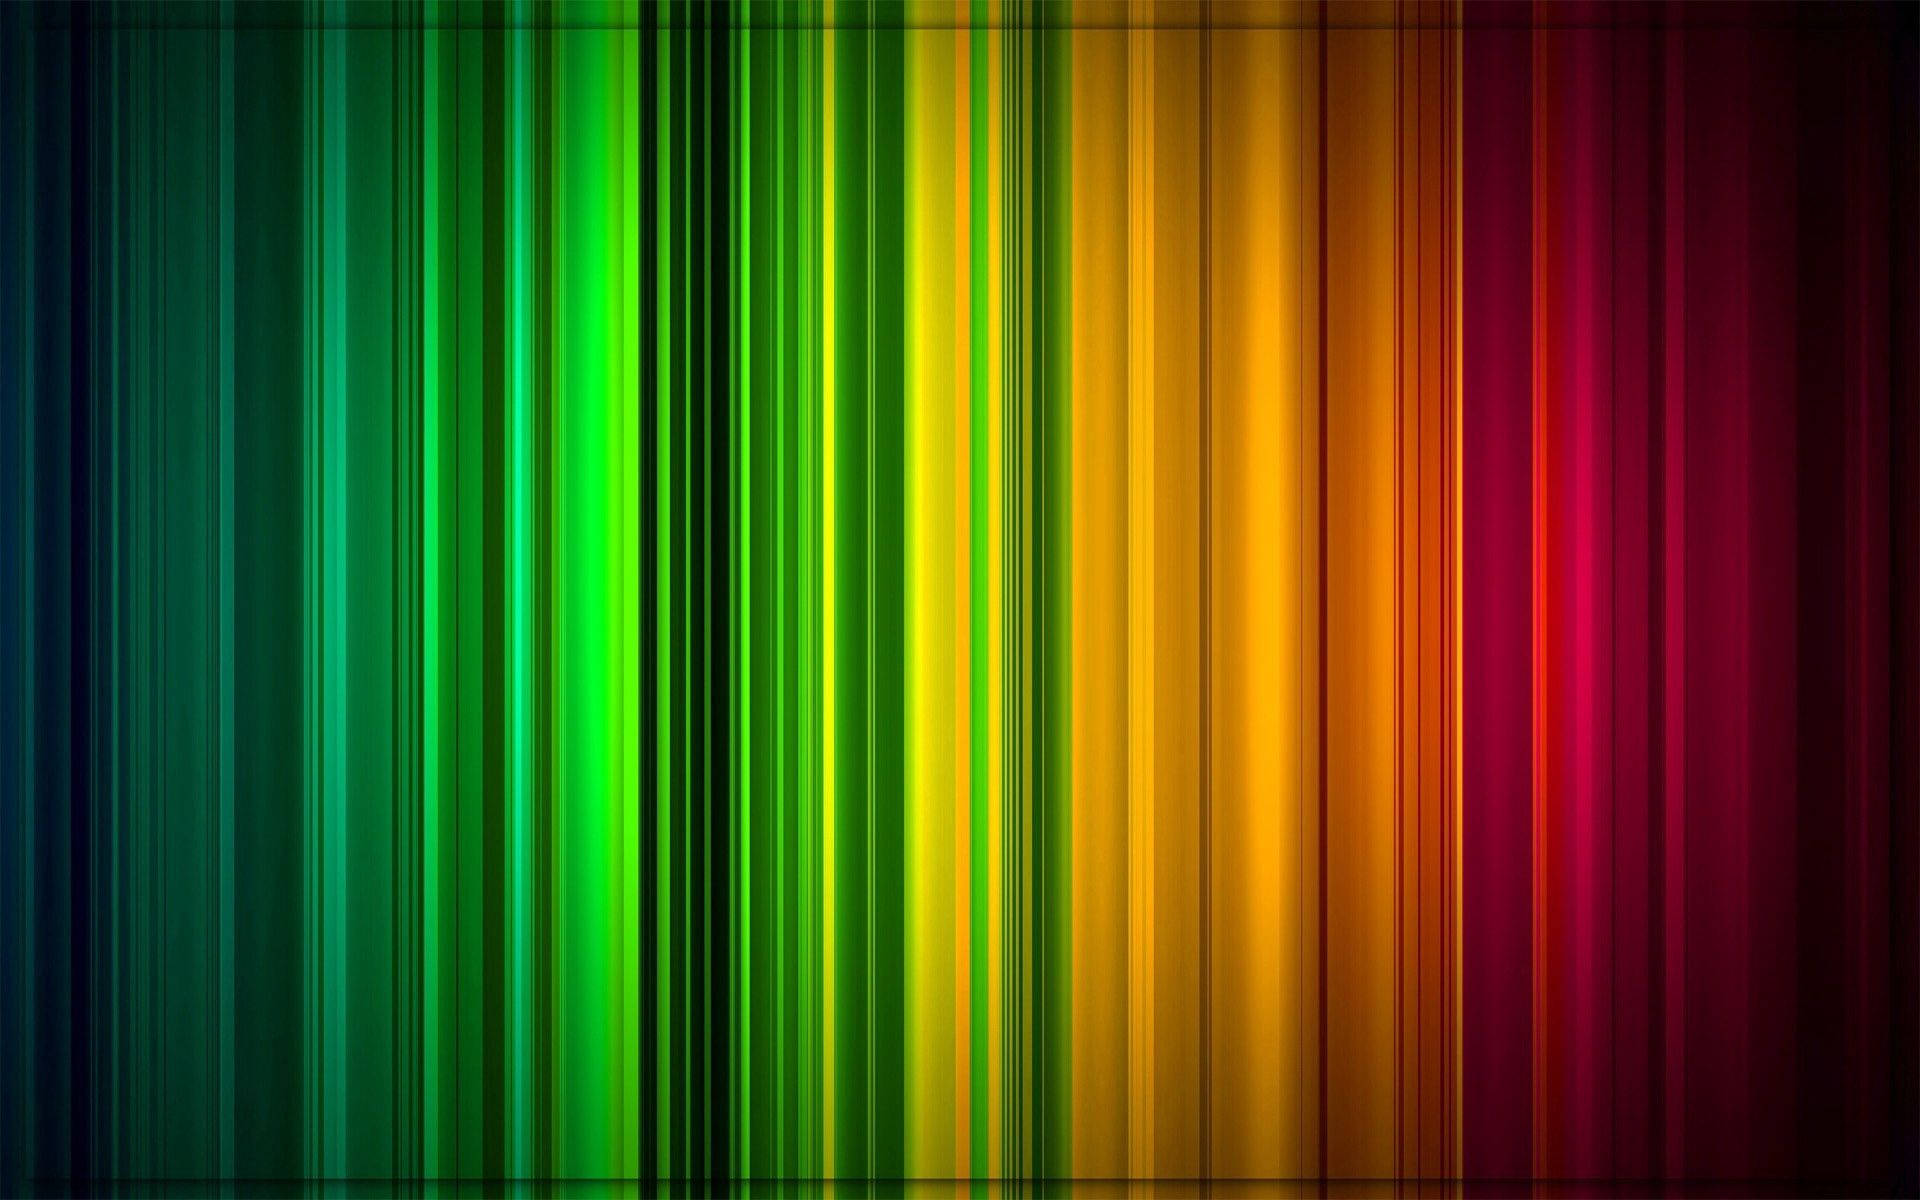 Rainbow Colored Wallpaper with Vertical Lines